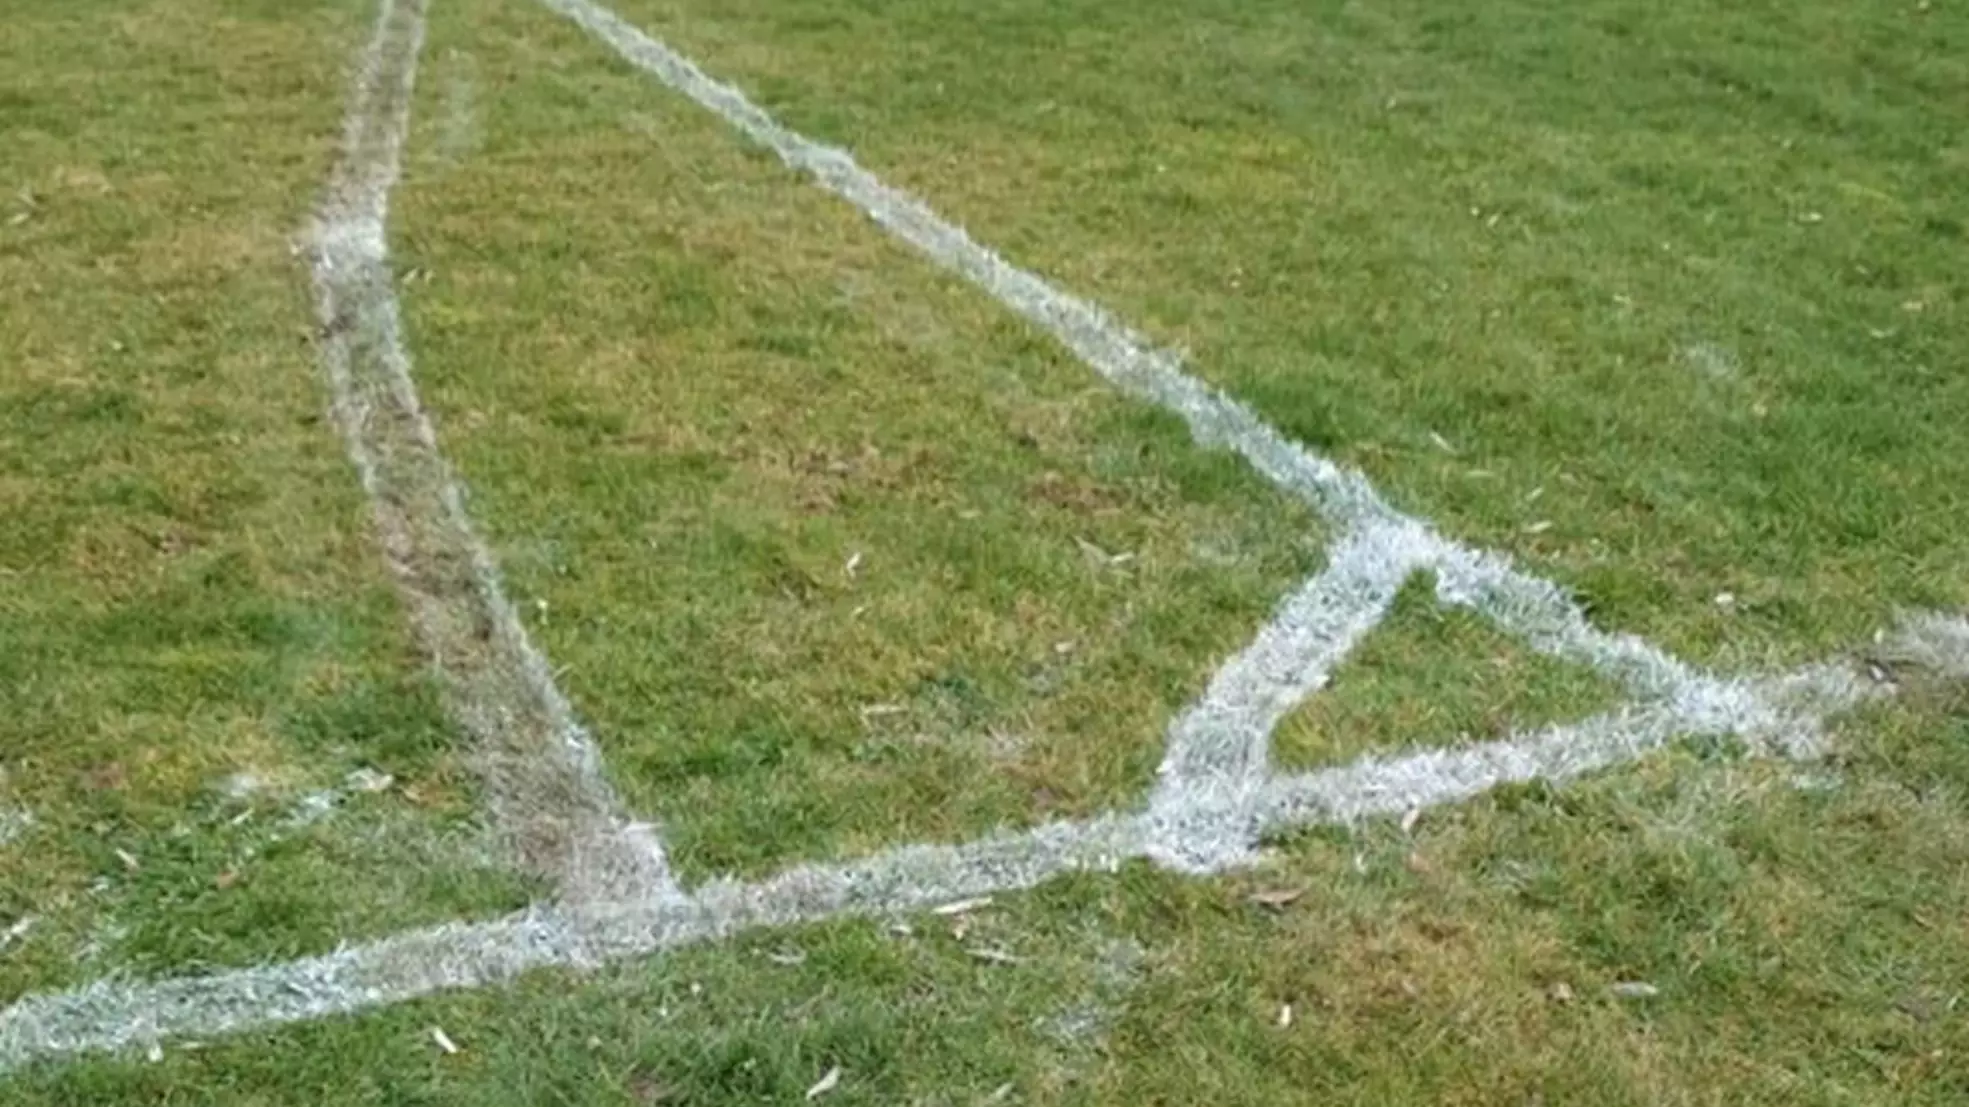 Contractor's Wonky Football Pitch Lines Go Viral As Council Responds 'Everyone Has To Start Somewhere'